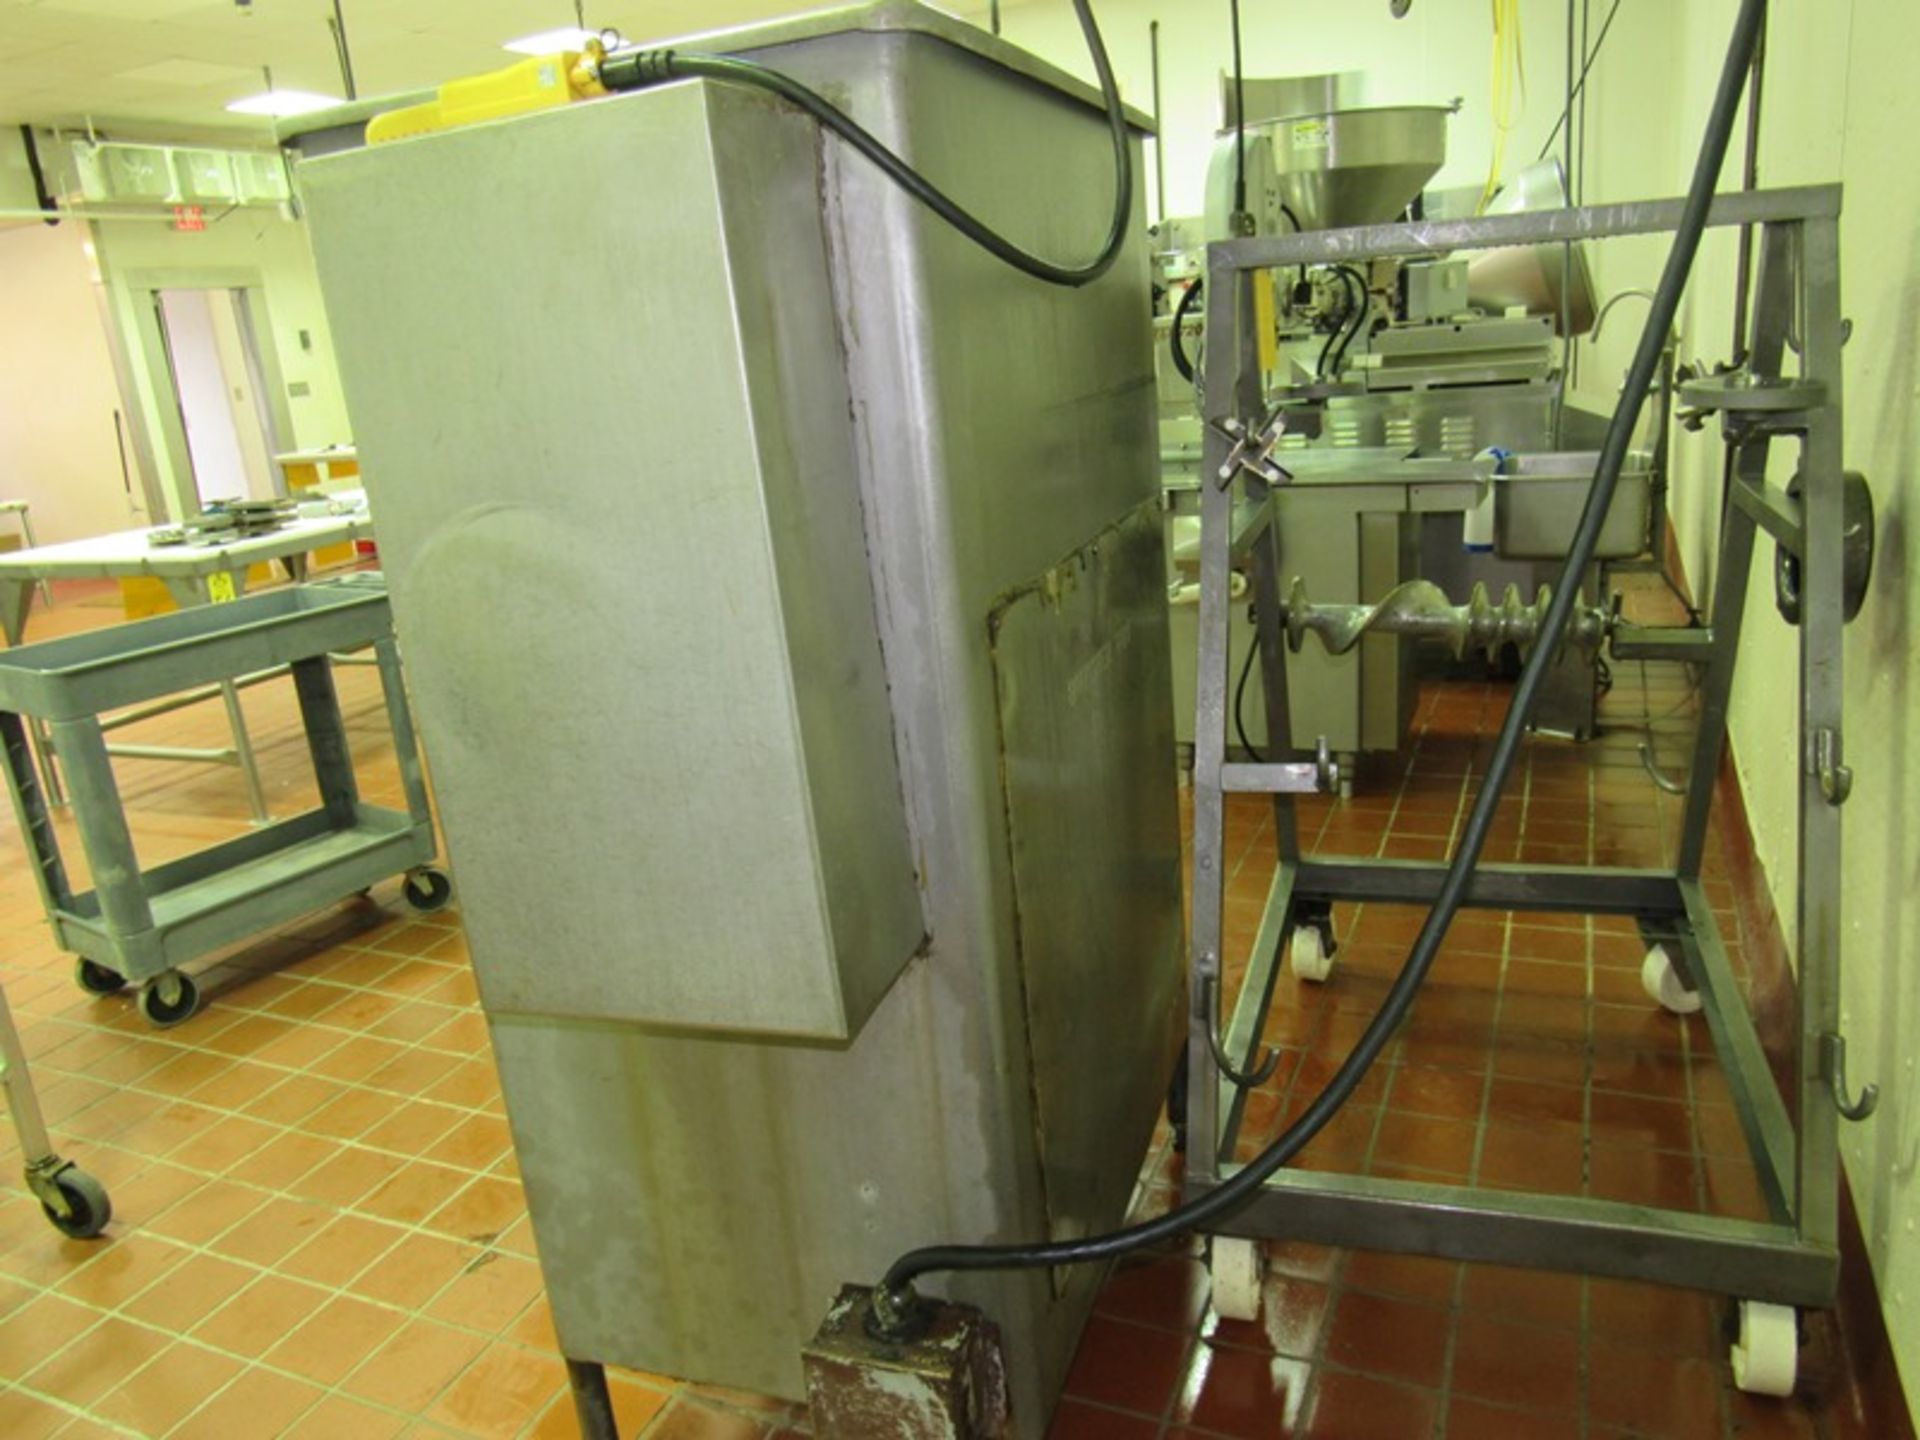 Butcher Boy Mdl. AU56 Grinder, 6" head, top agitation, 220 volts, 3 phase, with (2) plates and - Image 2 of 5